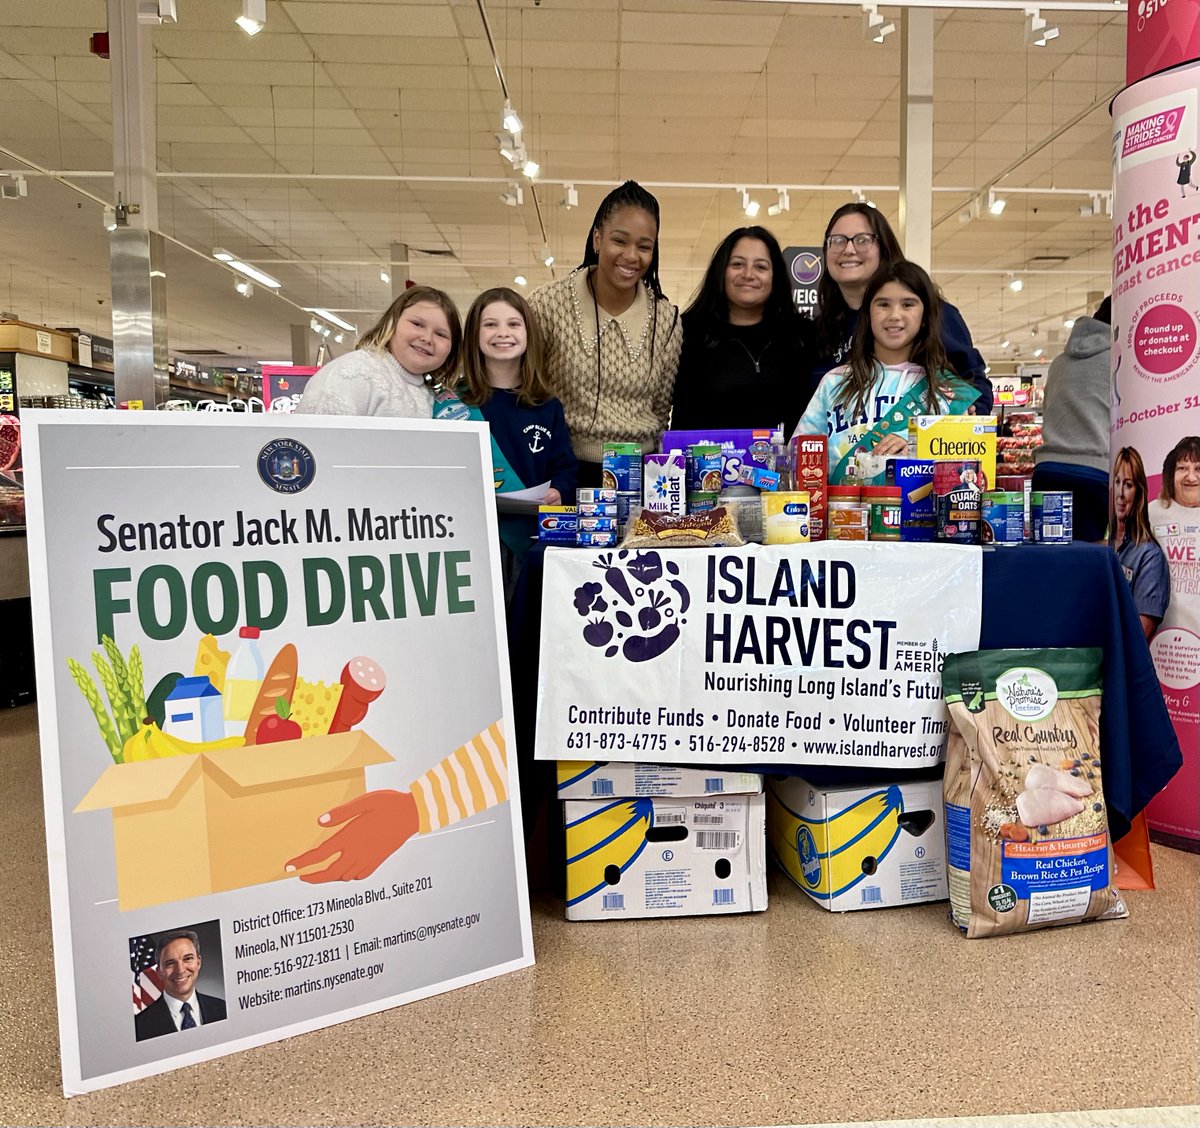 Thank you to everyone who donated to our recent food drive! We're so grateful for your generosity. We'd also like to thank Jericho Cares and @IslandHarvest for their support.

A special shout-out to @GSNC Troop 3399 for their impeccable work in making the food drive a success.